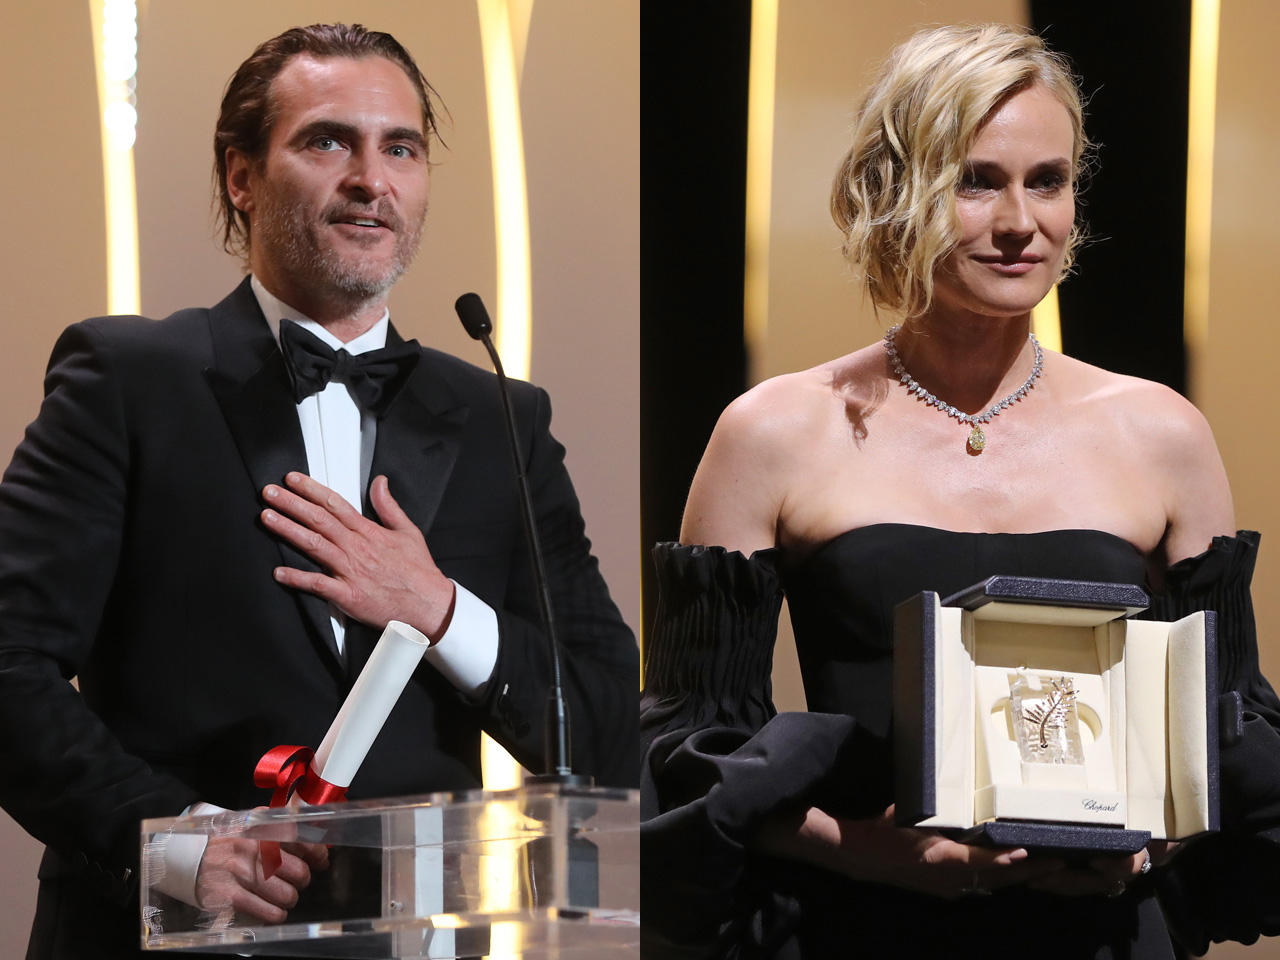 The Square' Wins Top Prize at Cannes; Sofia Coppola Is Best Director - The  New York Times